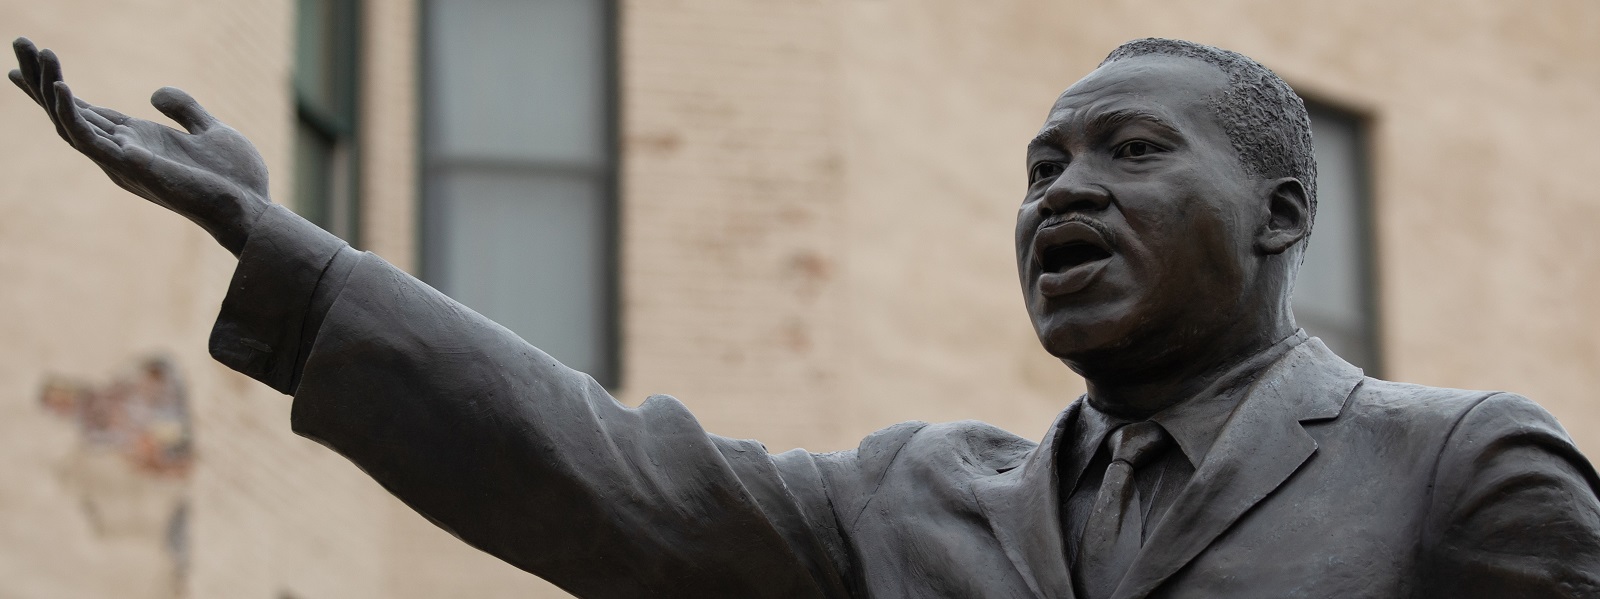 A statue of Martin Luther King, Jr. in Milwaukee